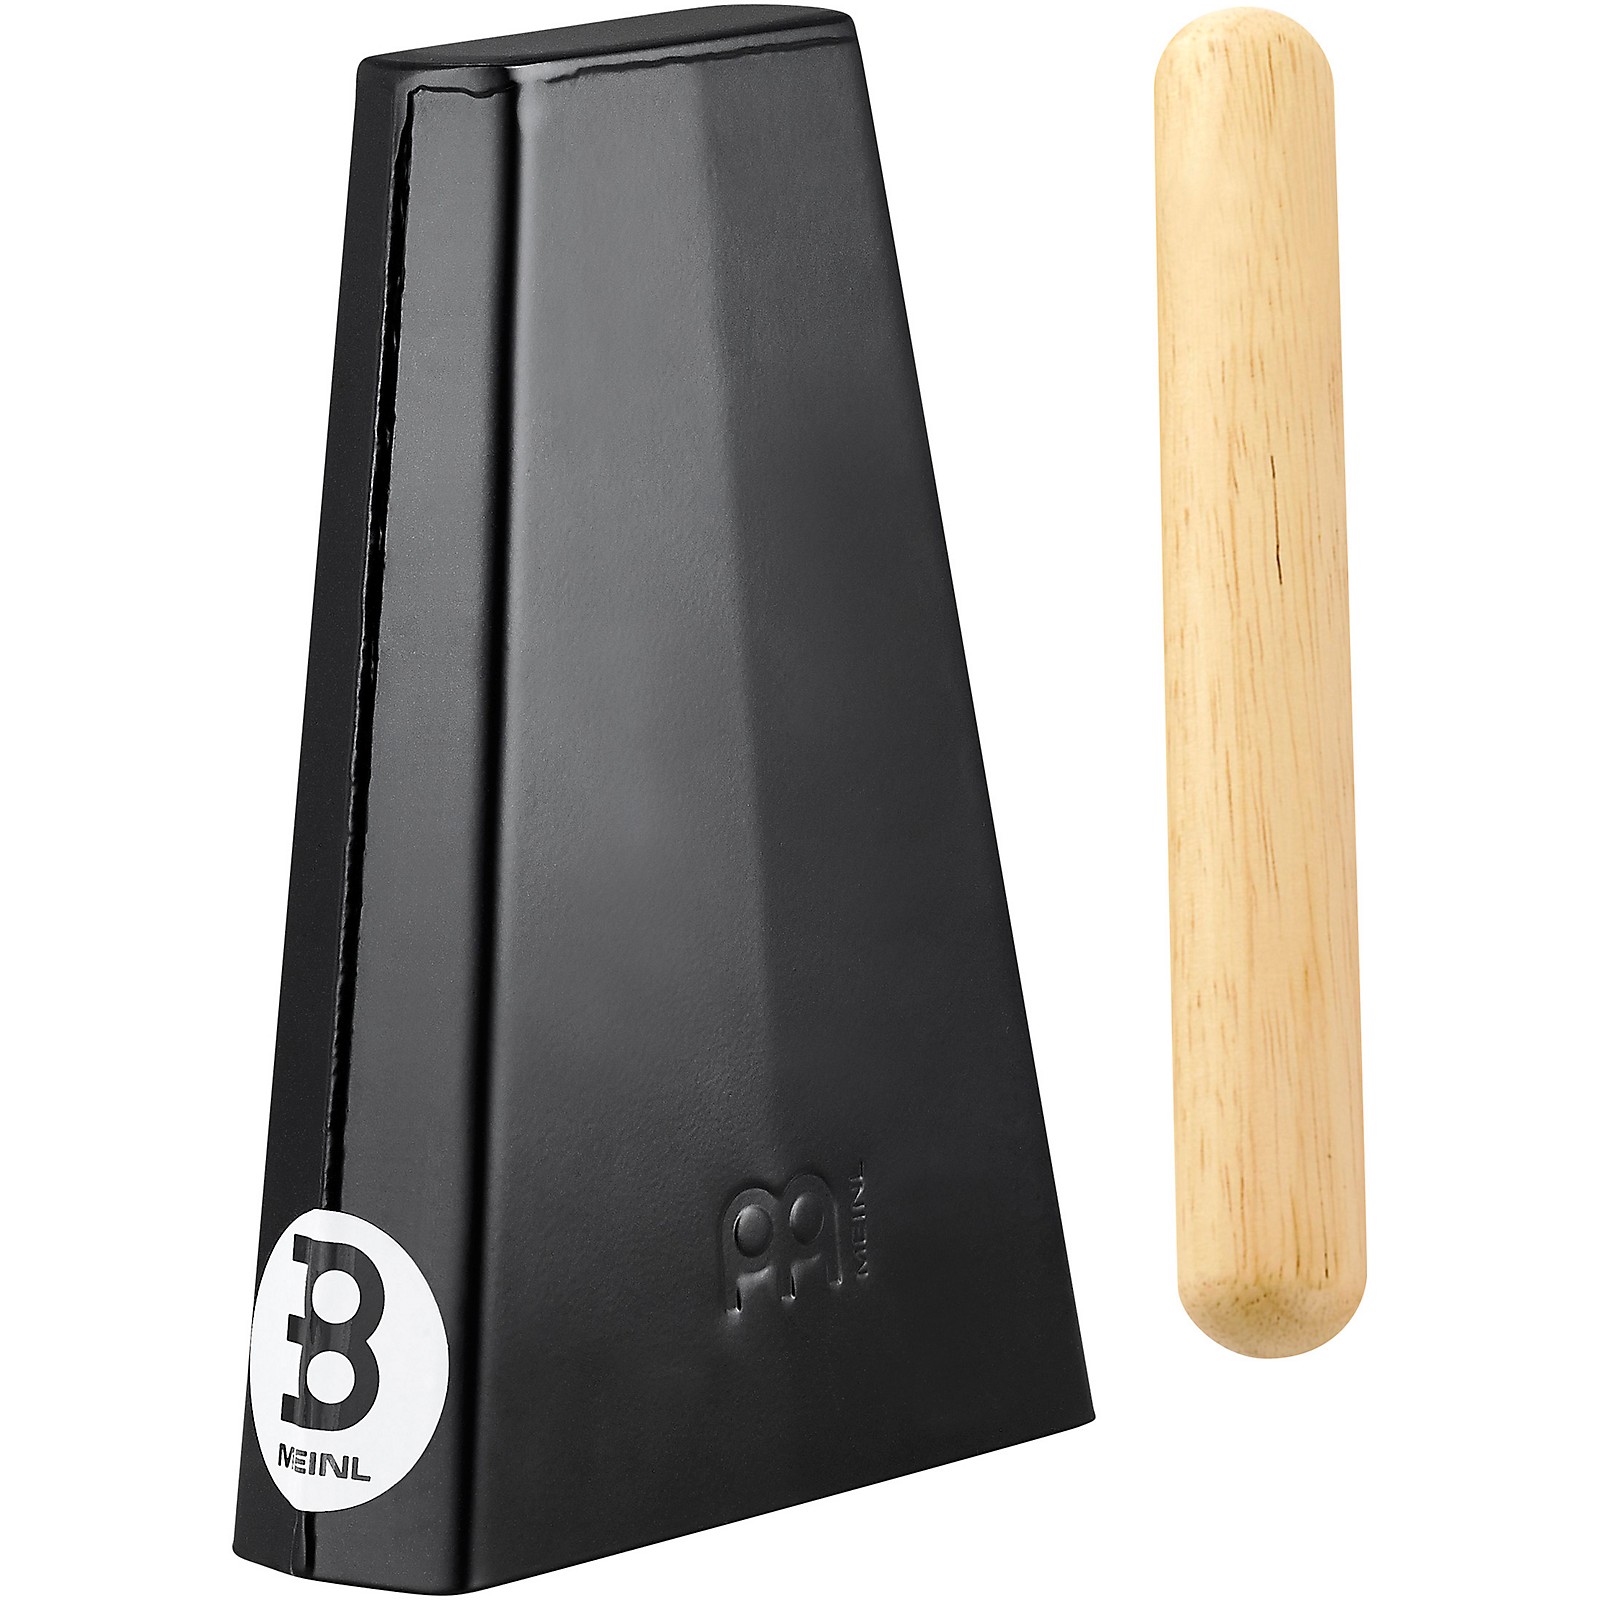 Handheld Cowbell, Large Cowbell